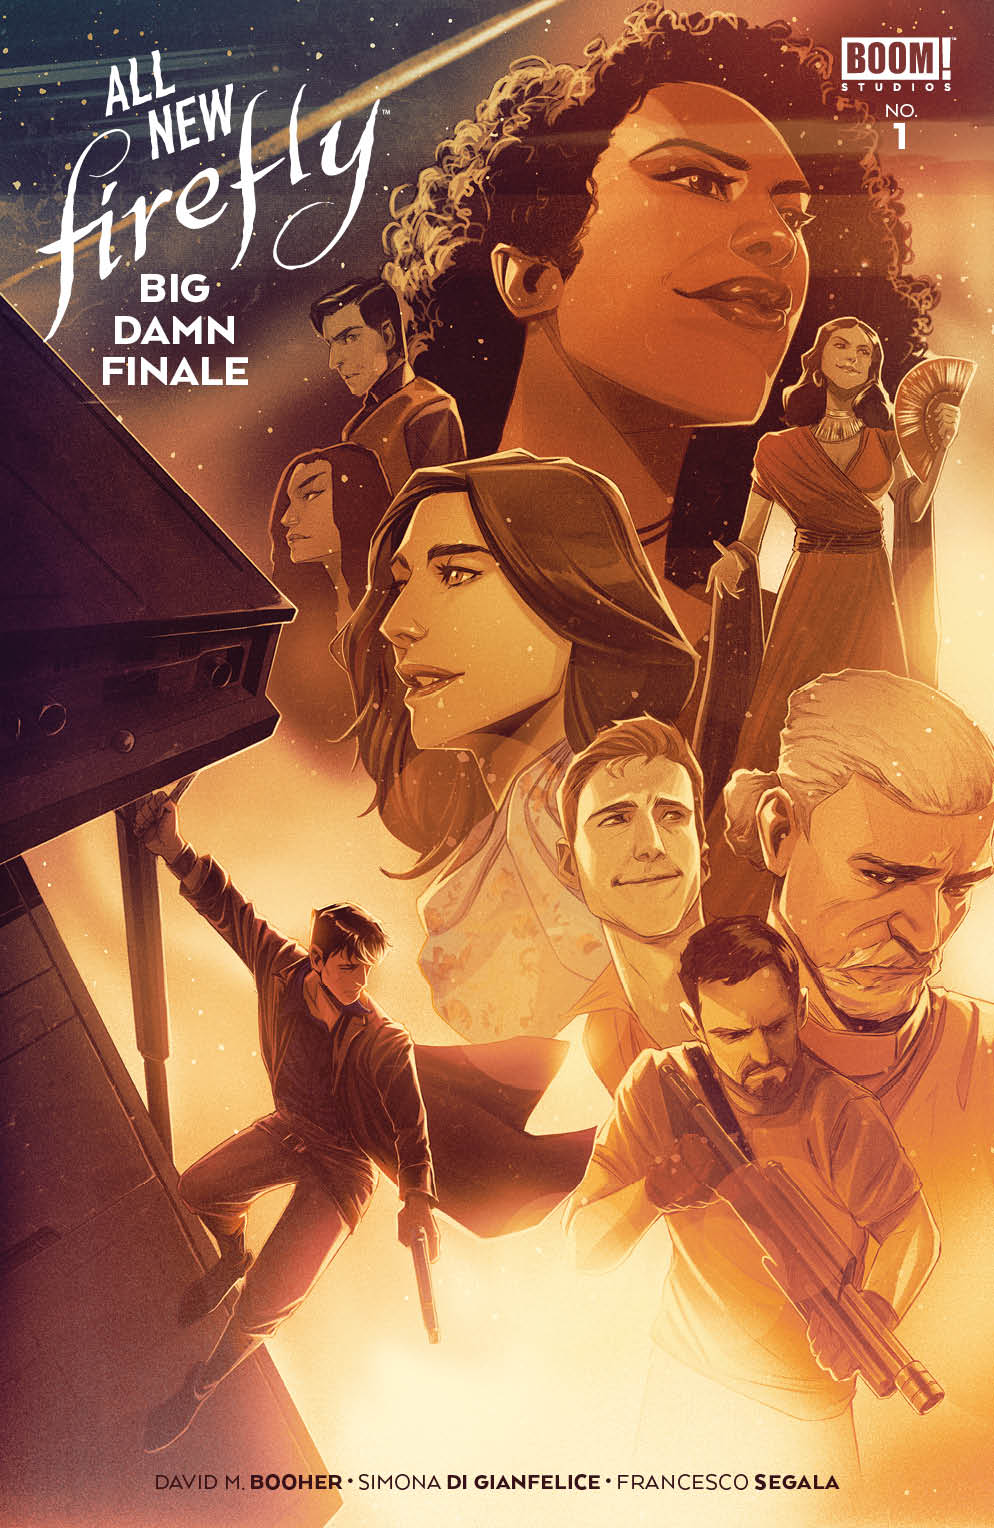 All-New Firefly: Big Damn Finale #1 - SPECIAL ISSUE.